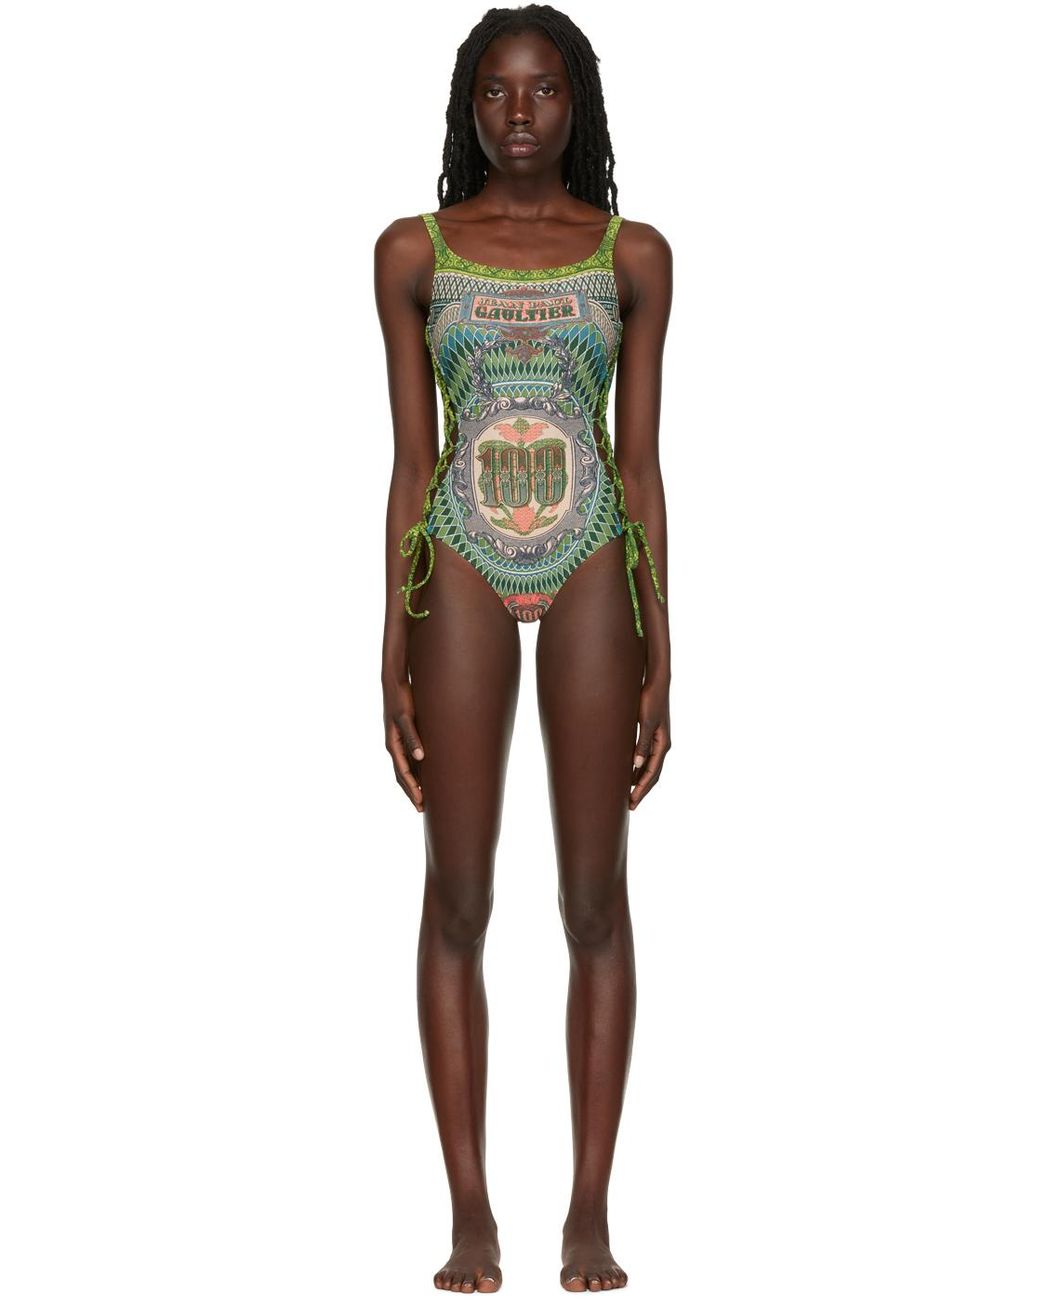 Foreign Money Swimsuit - Noire by Genese Legere